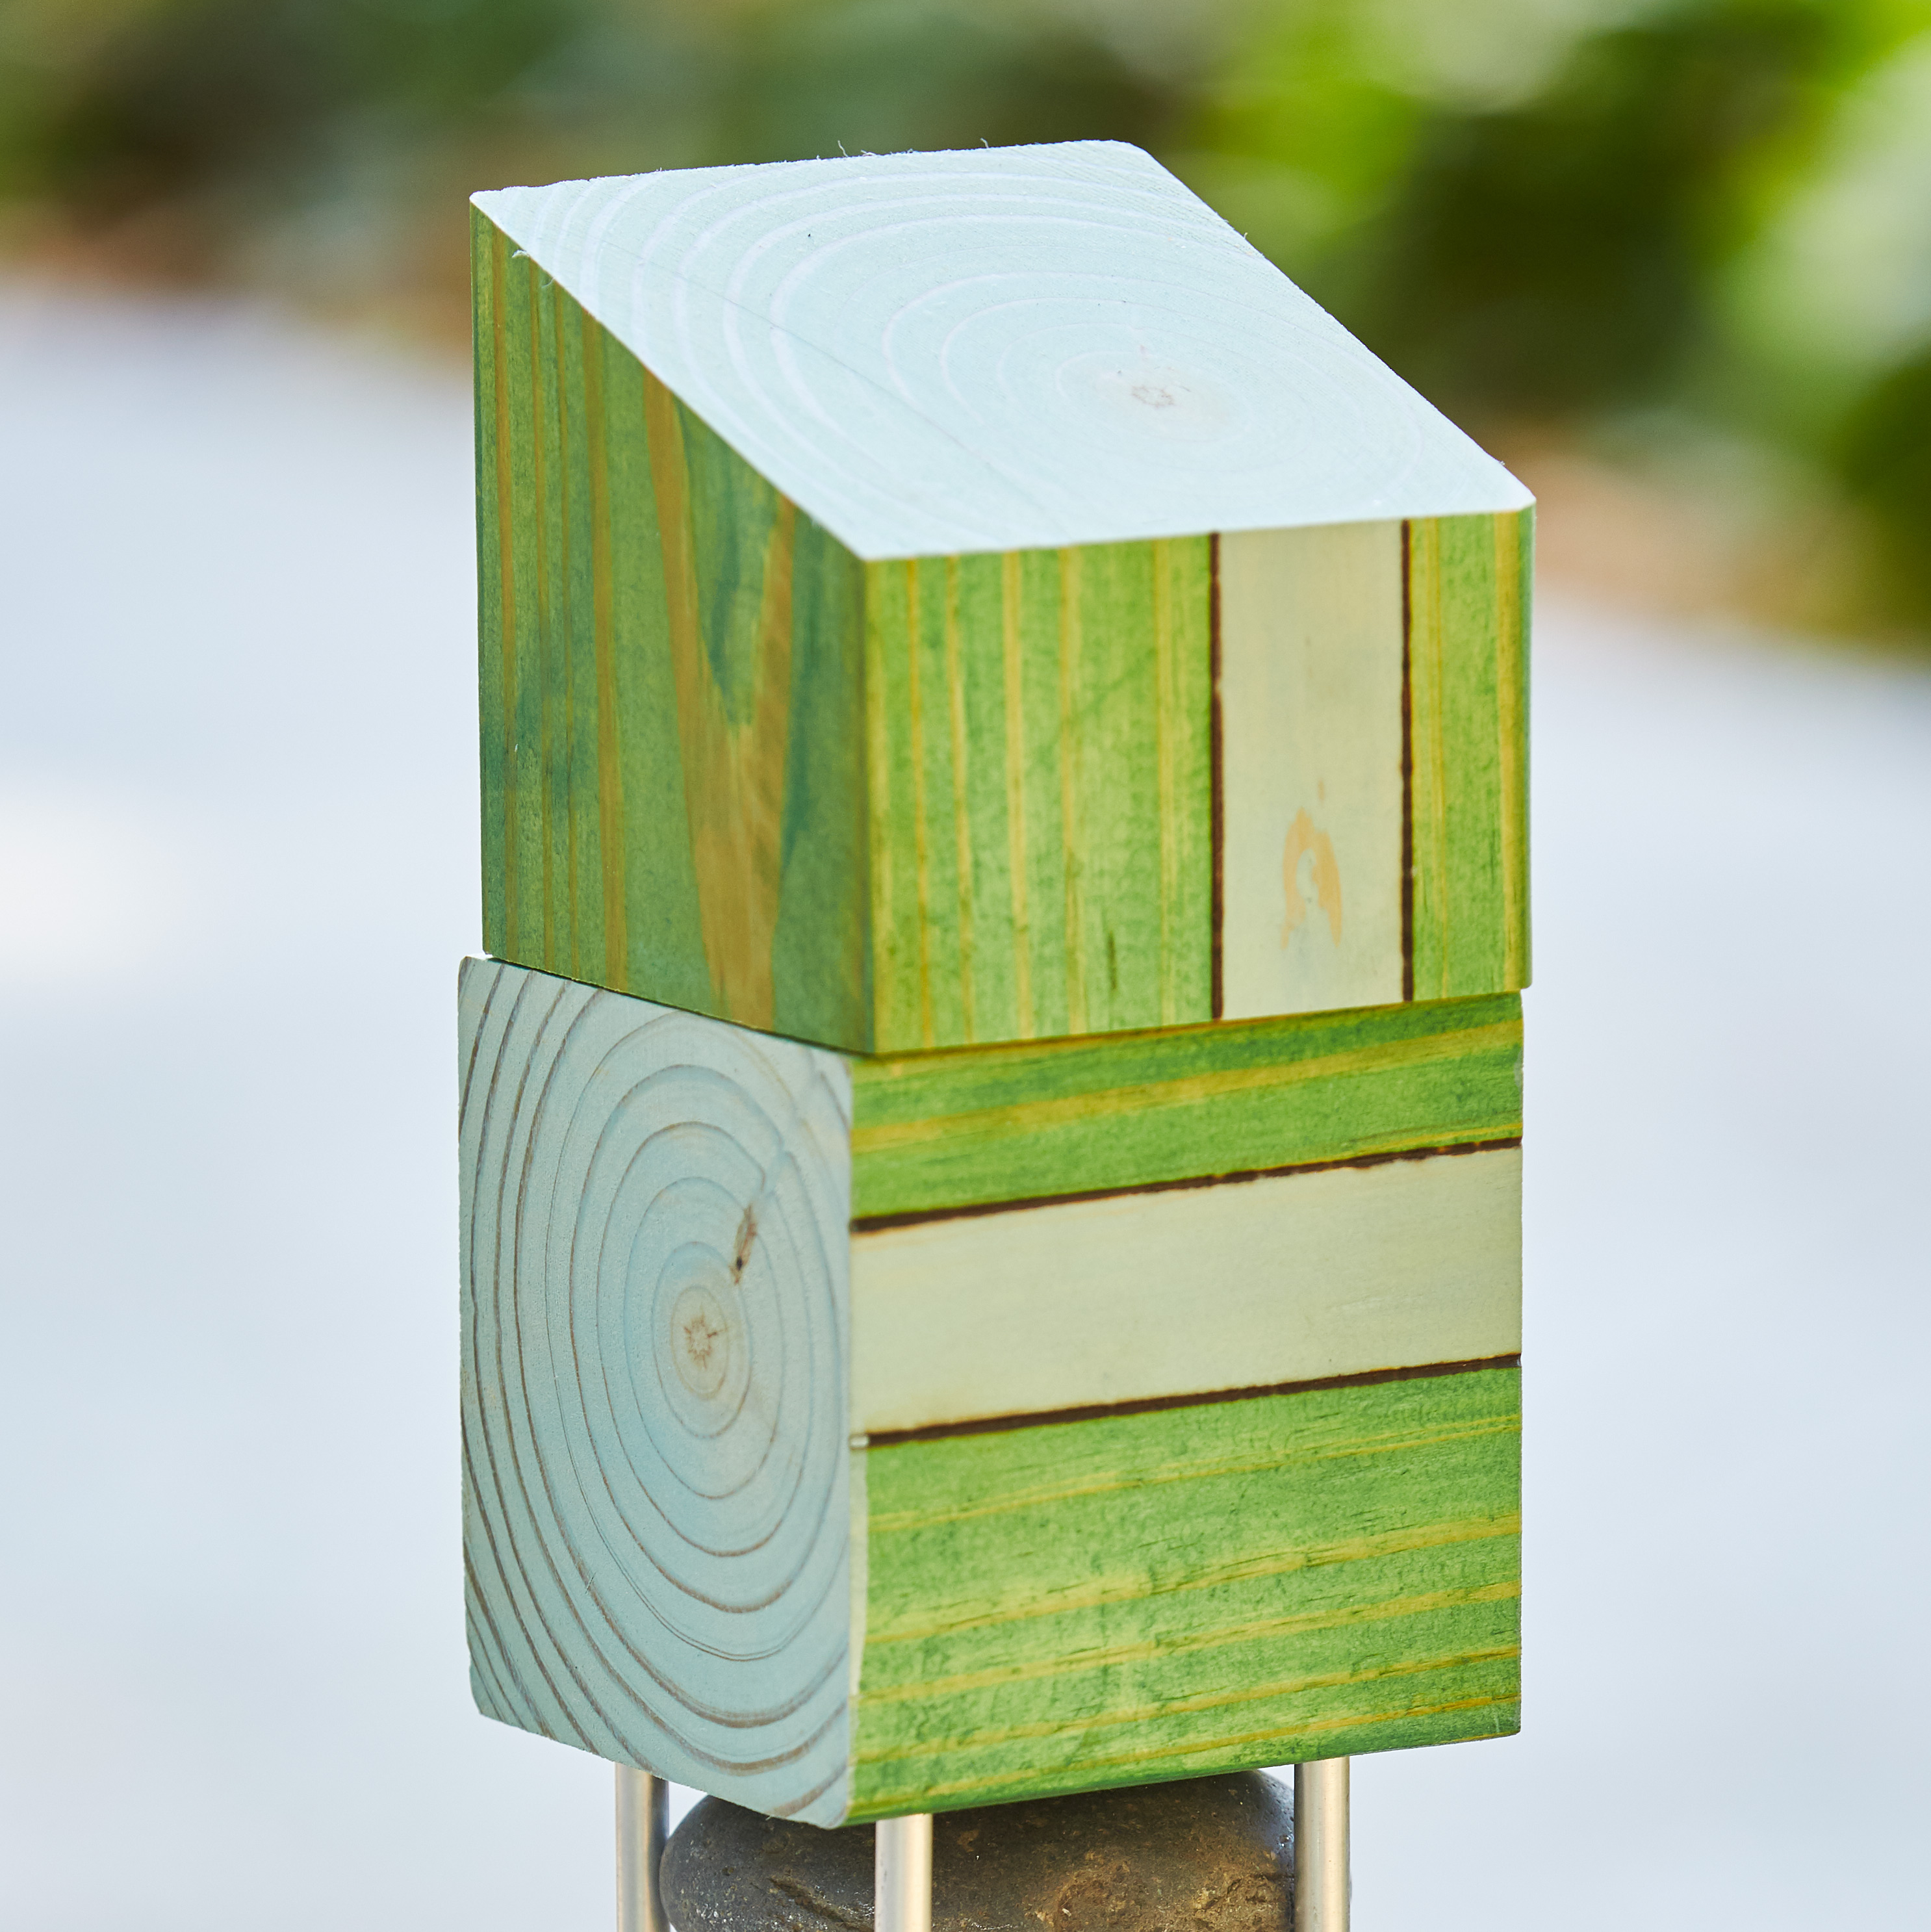 diy-garden-poles-topper: Semi-transparent stain allows wood grain to show through the top and exposed sides.